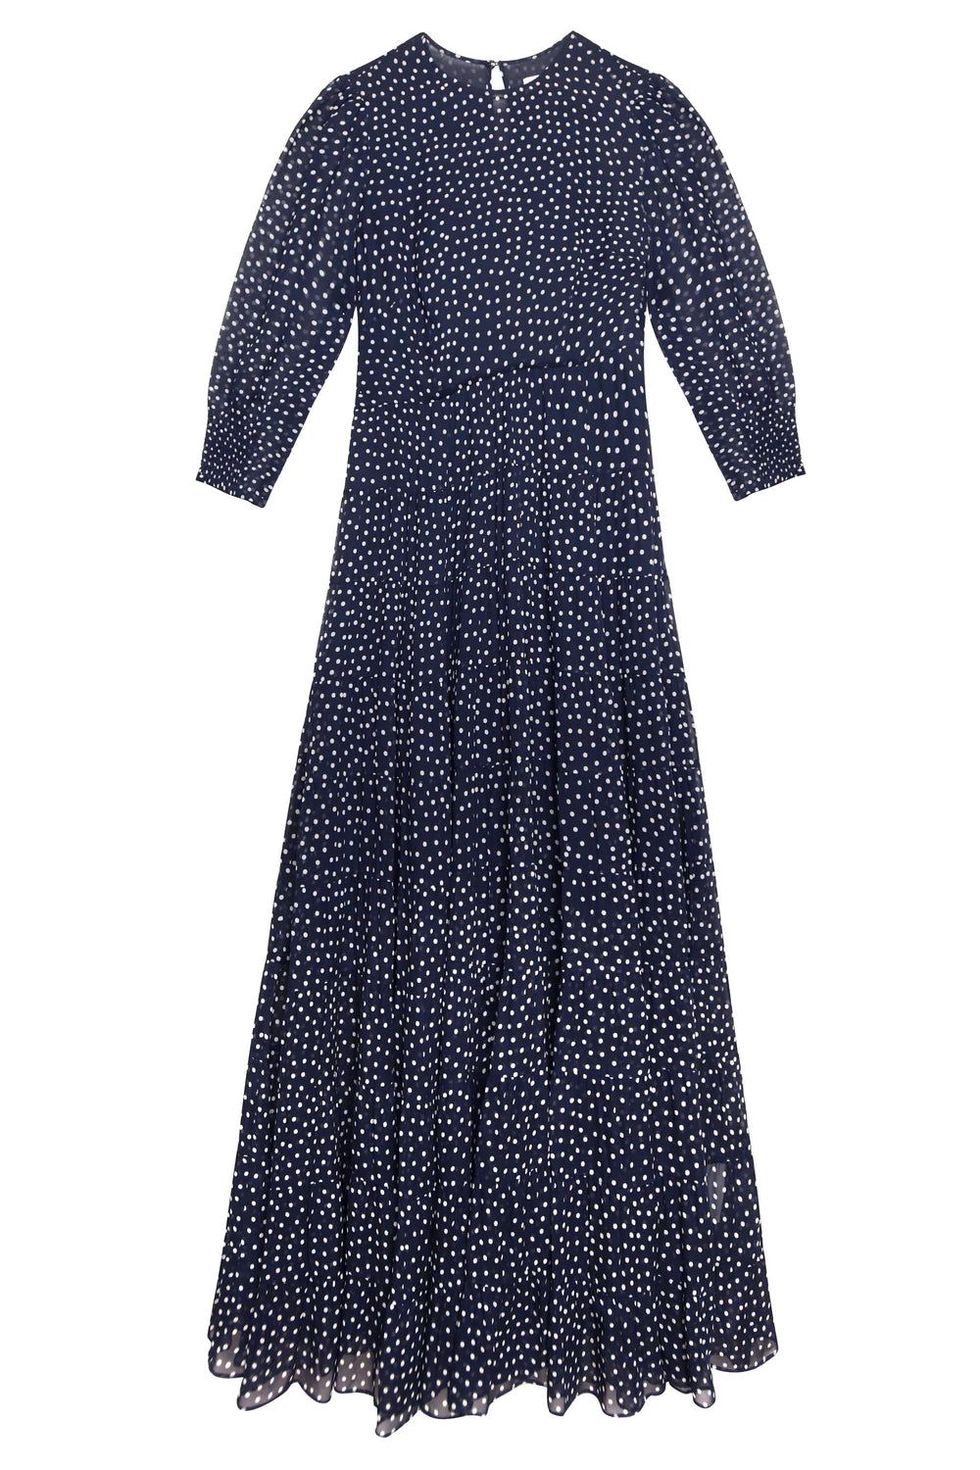 The best Rixo dresses to buy now and wear forever